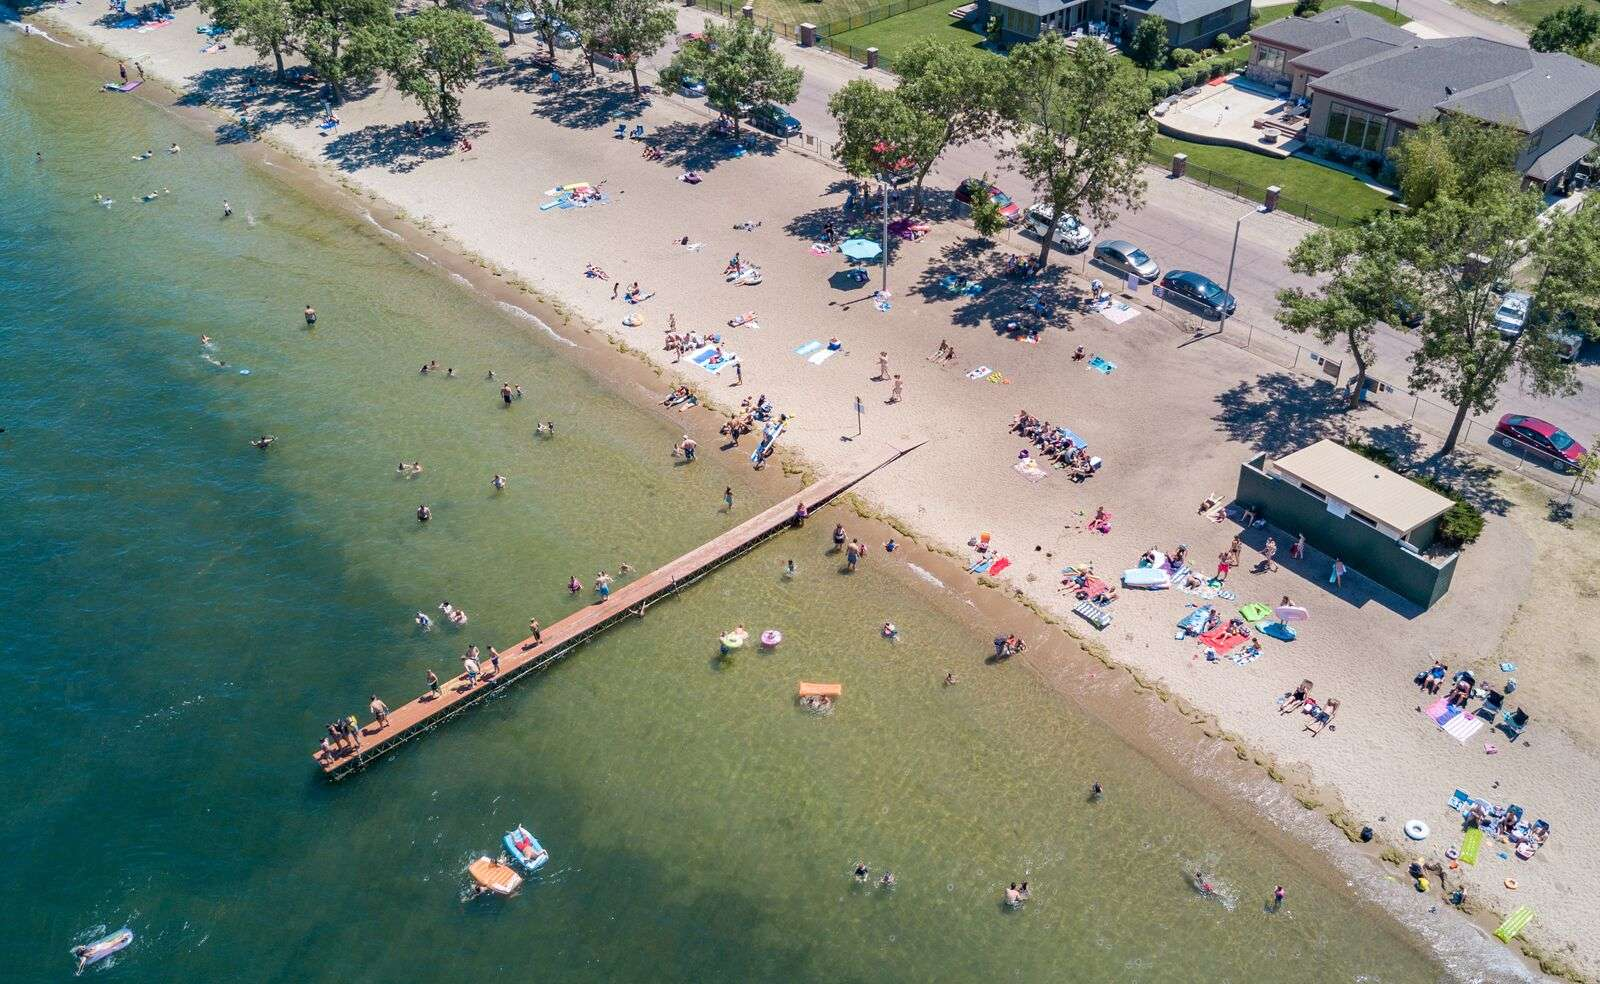 Boat ramp,sandy beach,paddleboard rentals makes for fun exploring Okoboji on a sup board, paddle boards are the perfect way to enjoy this location, life jackets required.